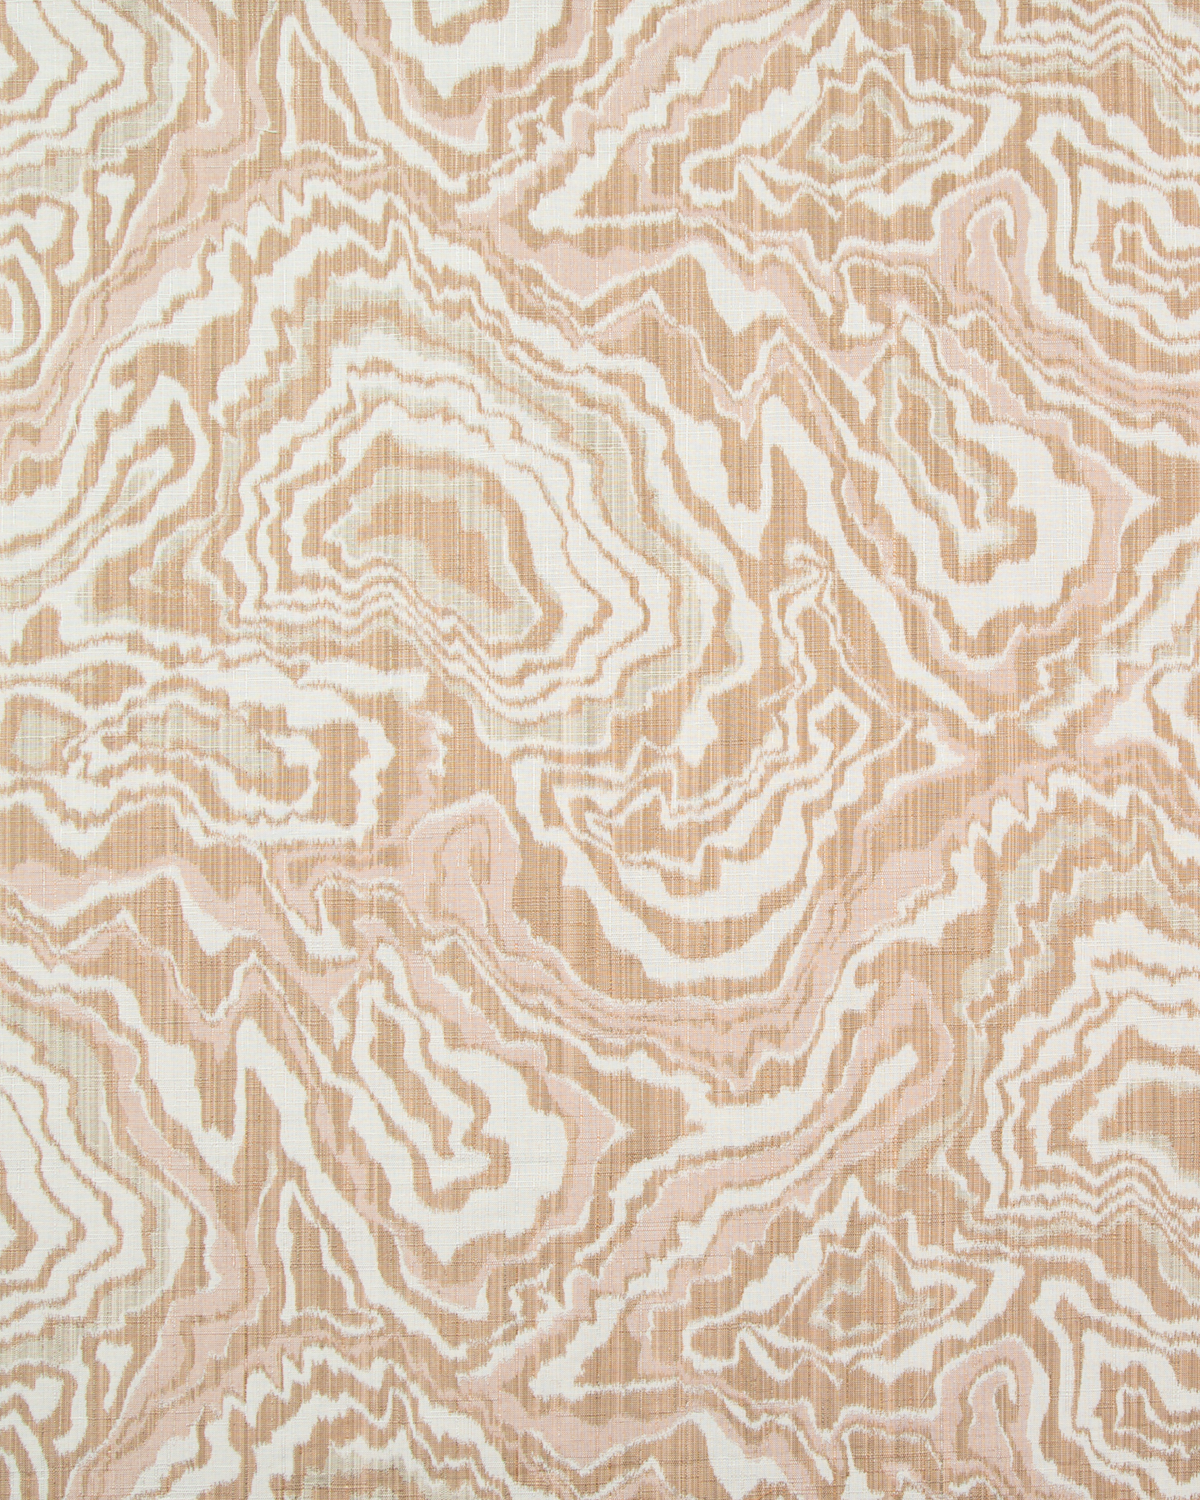 Marble Geode Fabric in Blushing Taupe